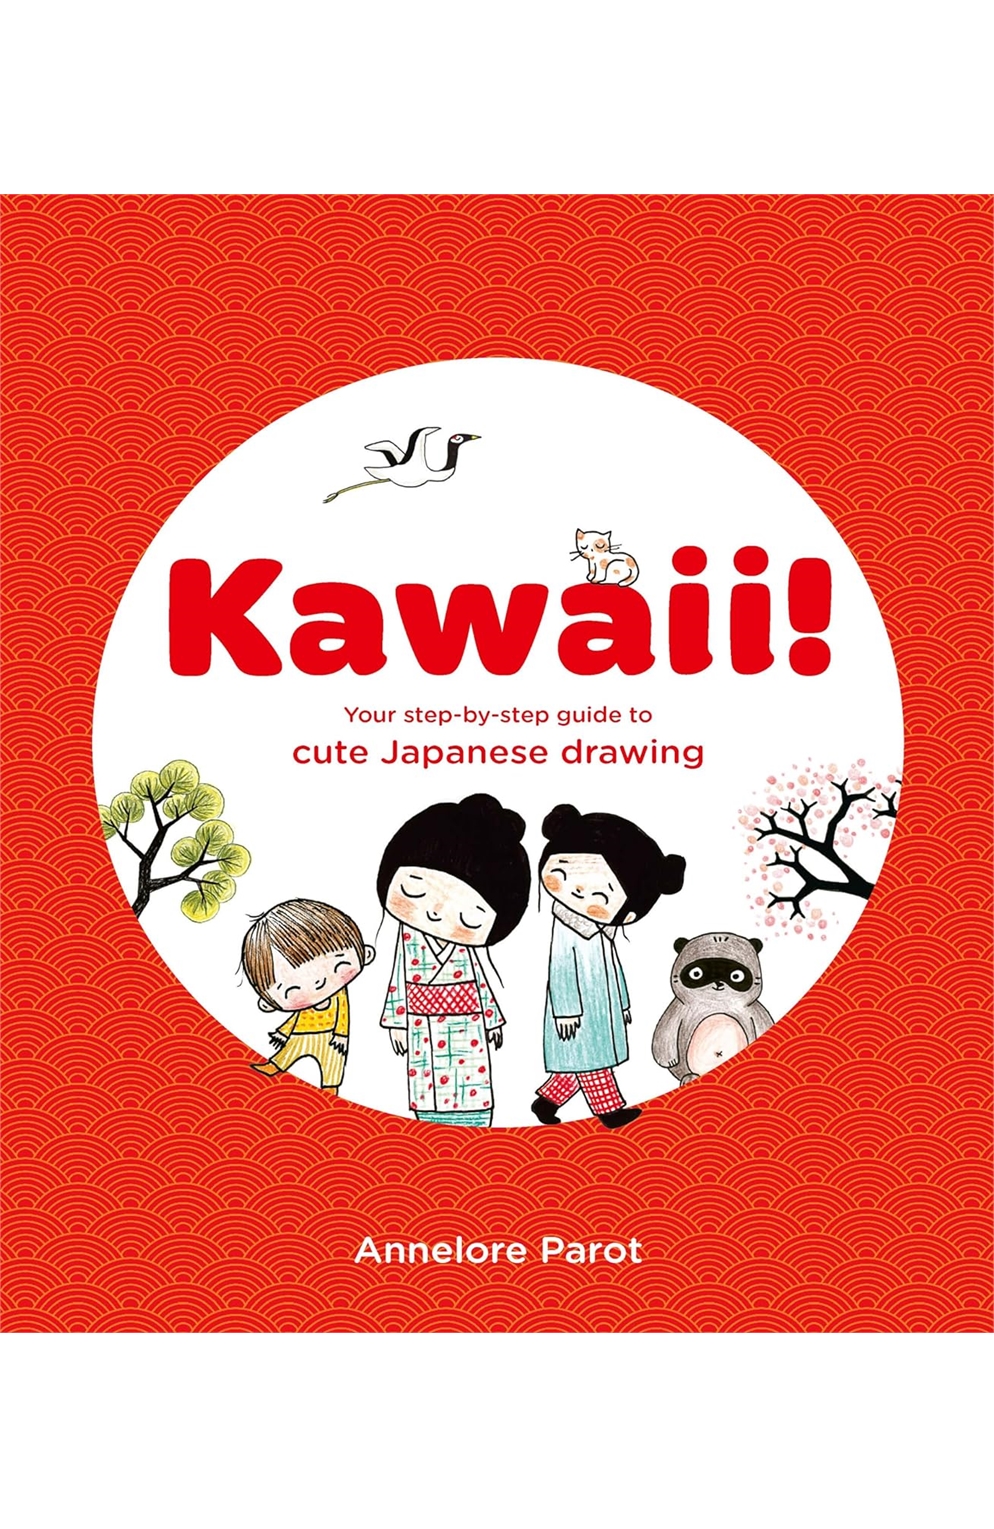 Kawaii!: Your Step-By-Step Guide To Cute Japanese Drawing